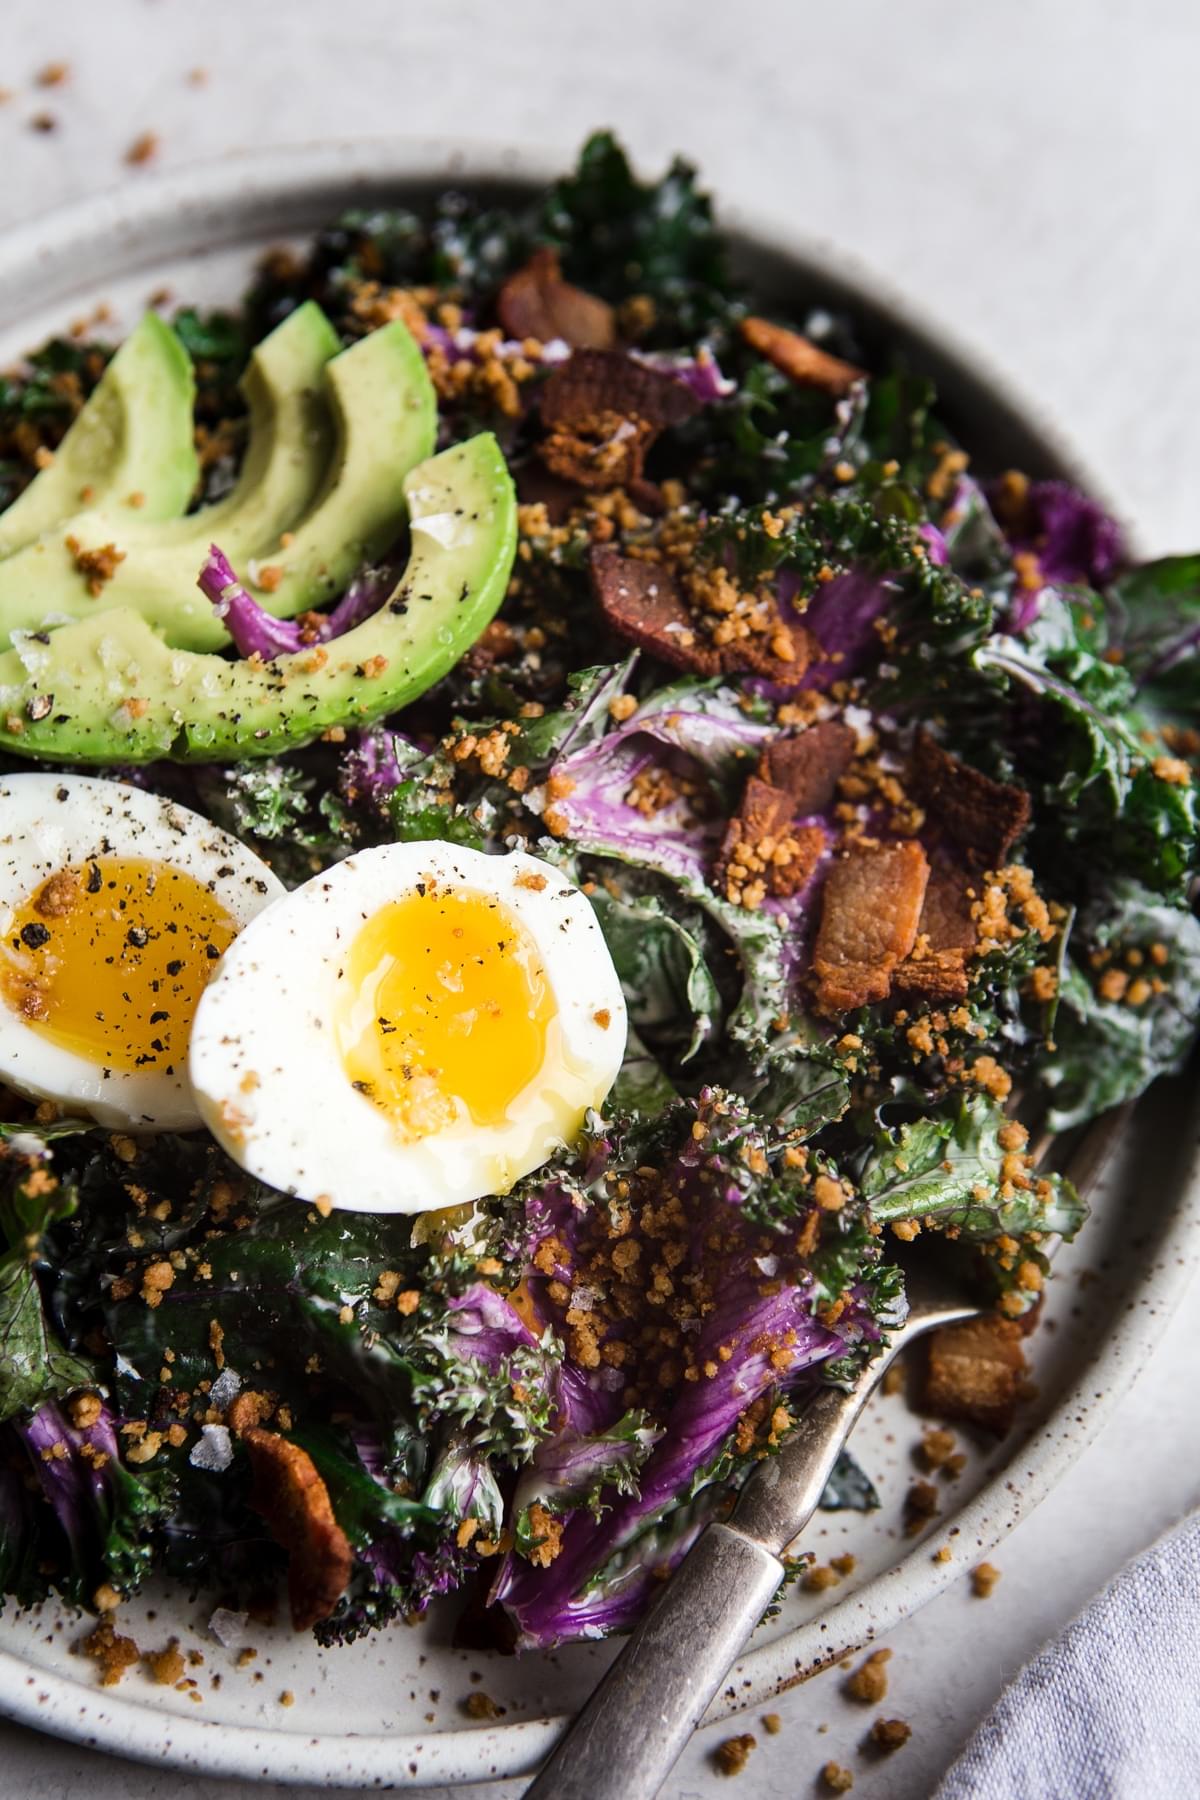 Whole30 approved Kale caesar salad with soft boiled eggs